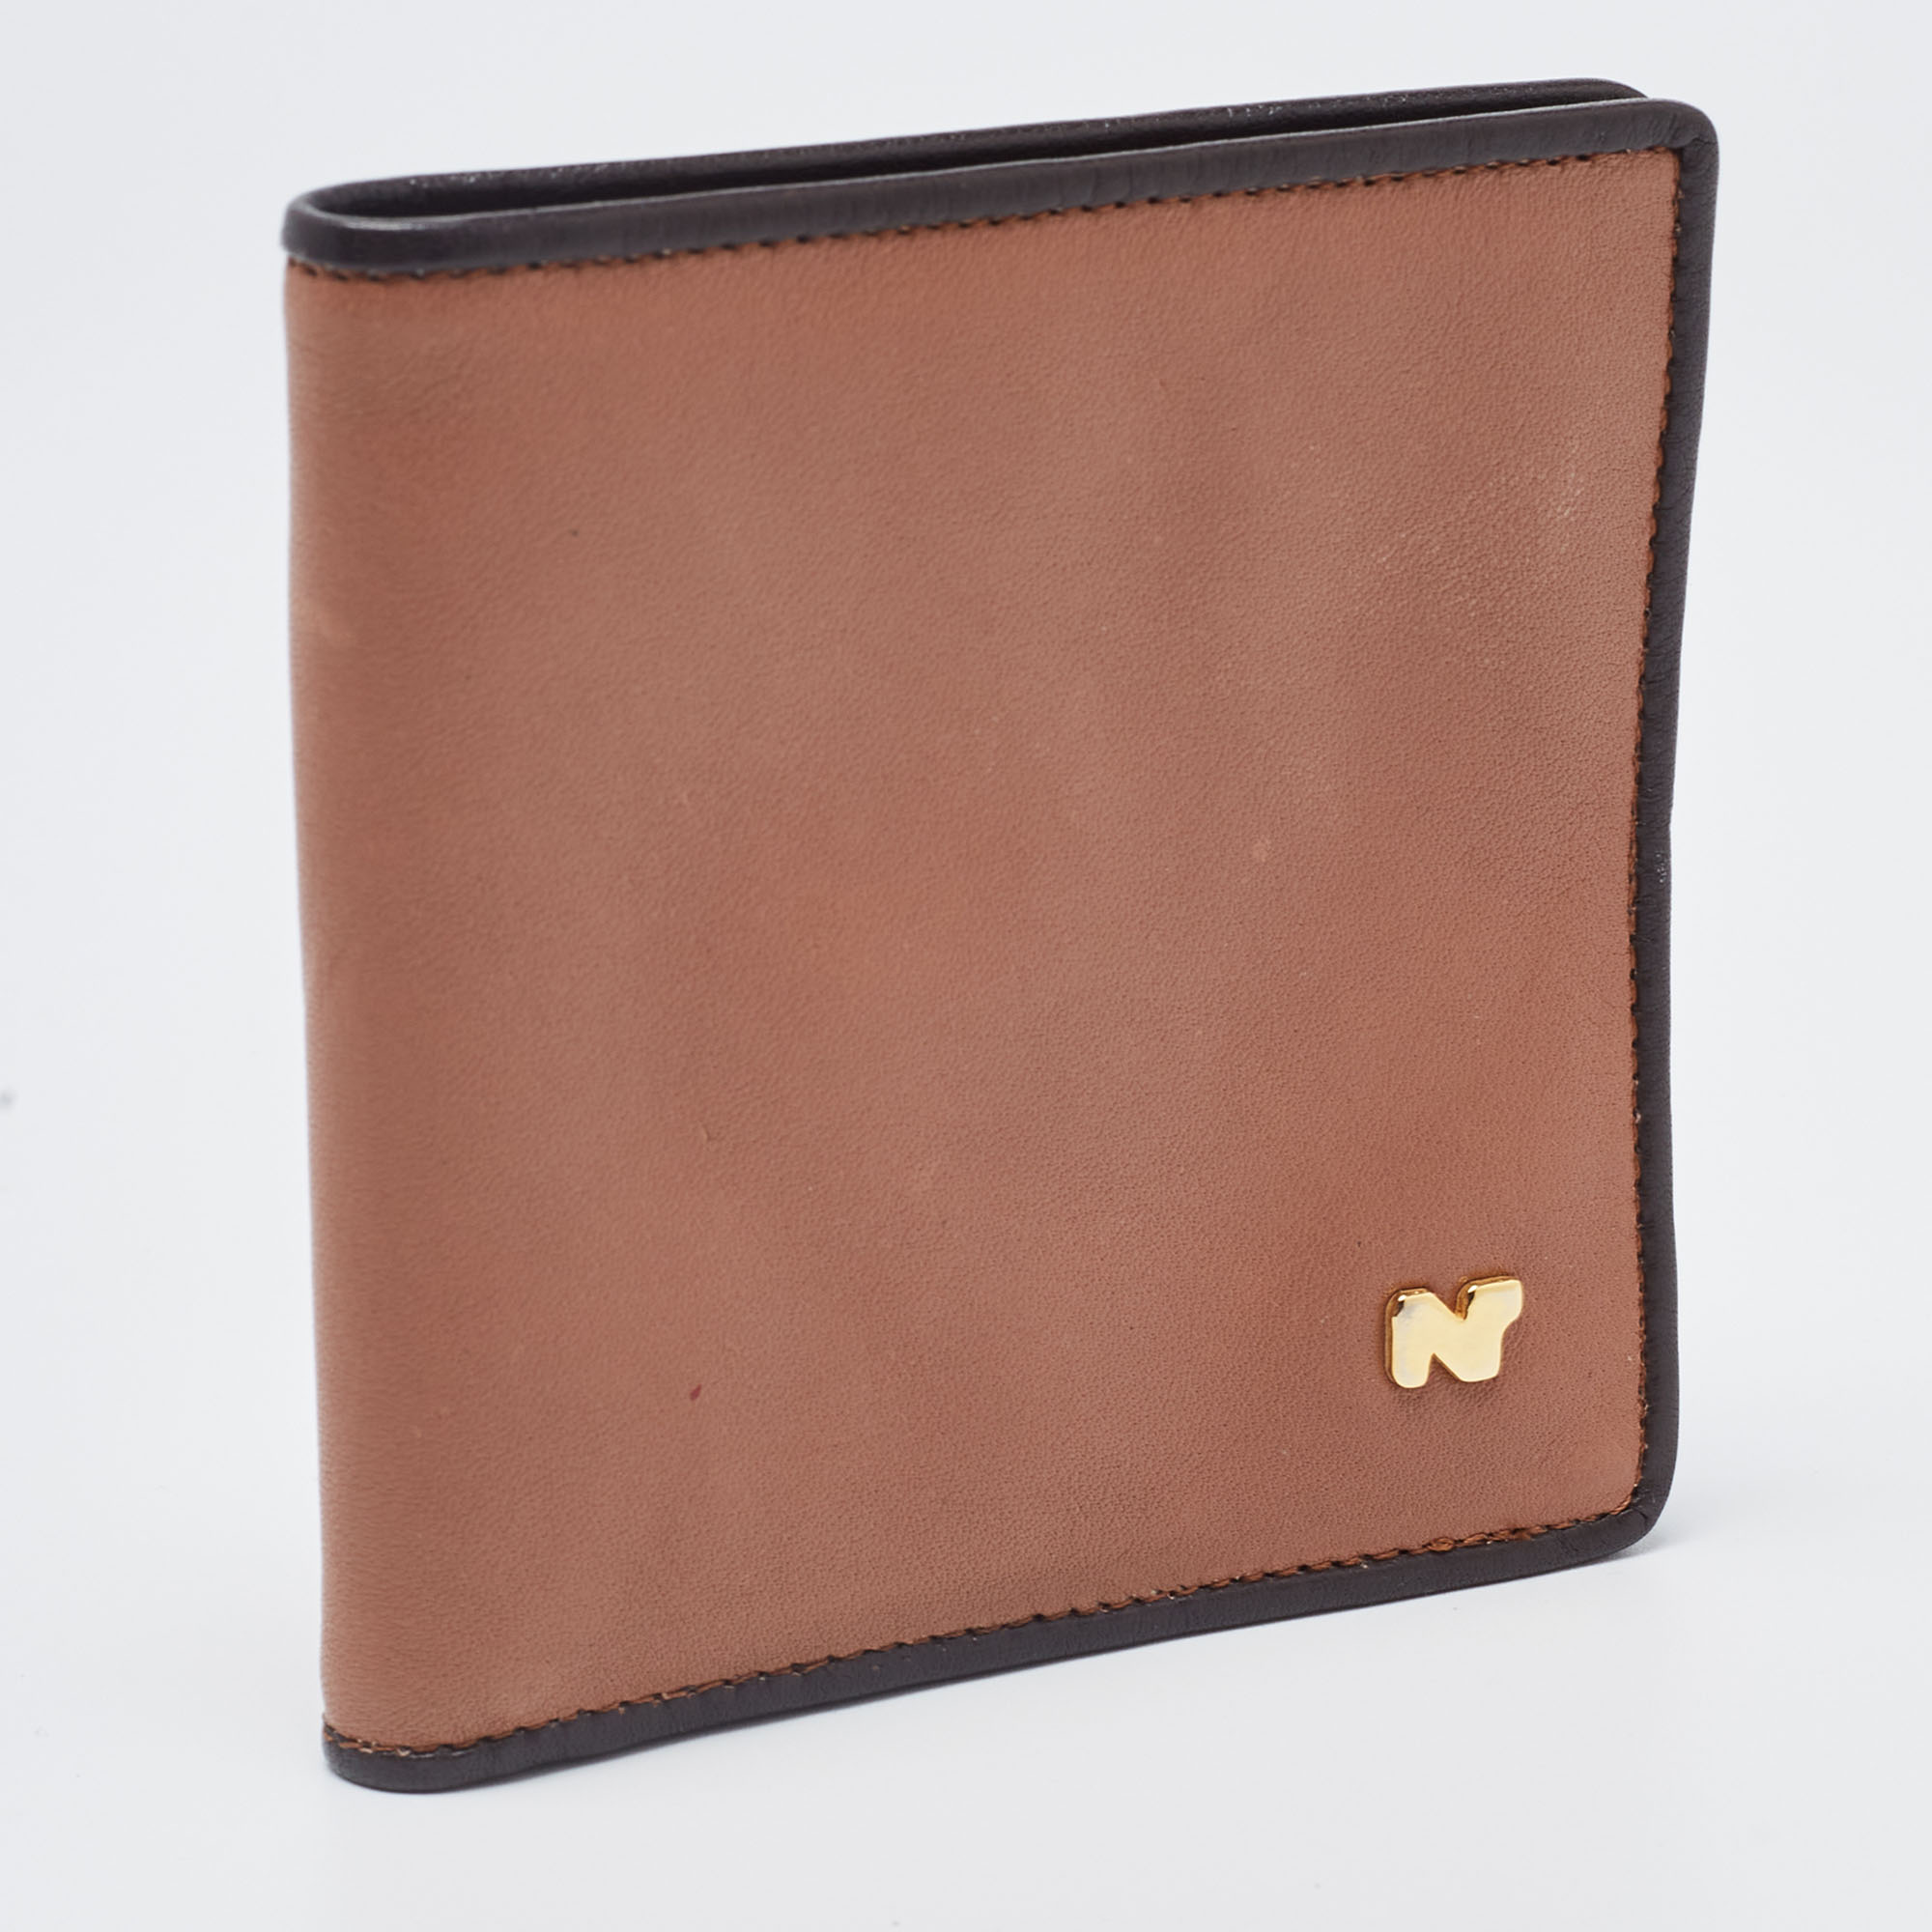 Nina Ricci Two Tone Brown Leather Bifold Compact Wallet